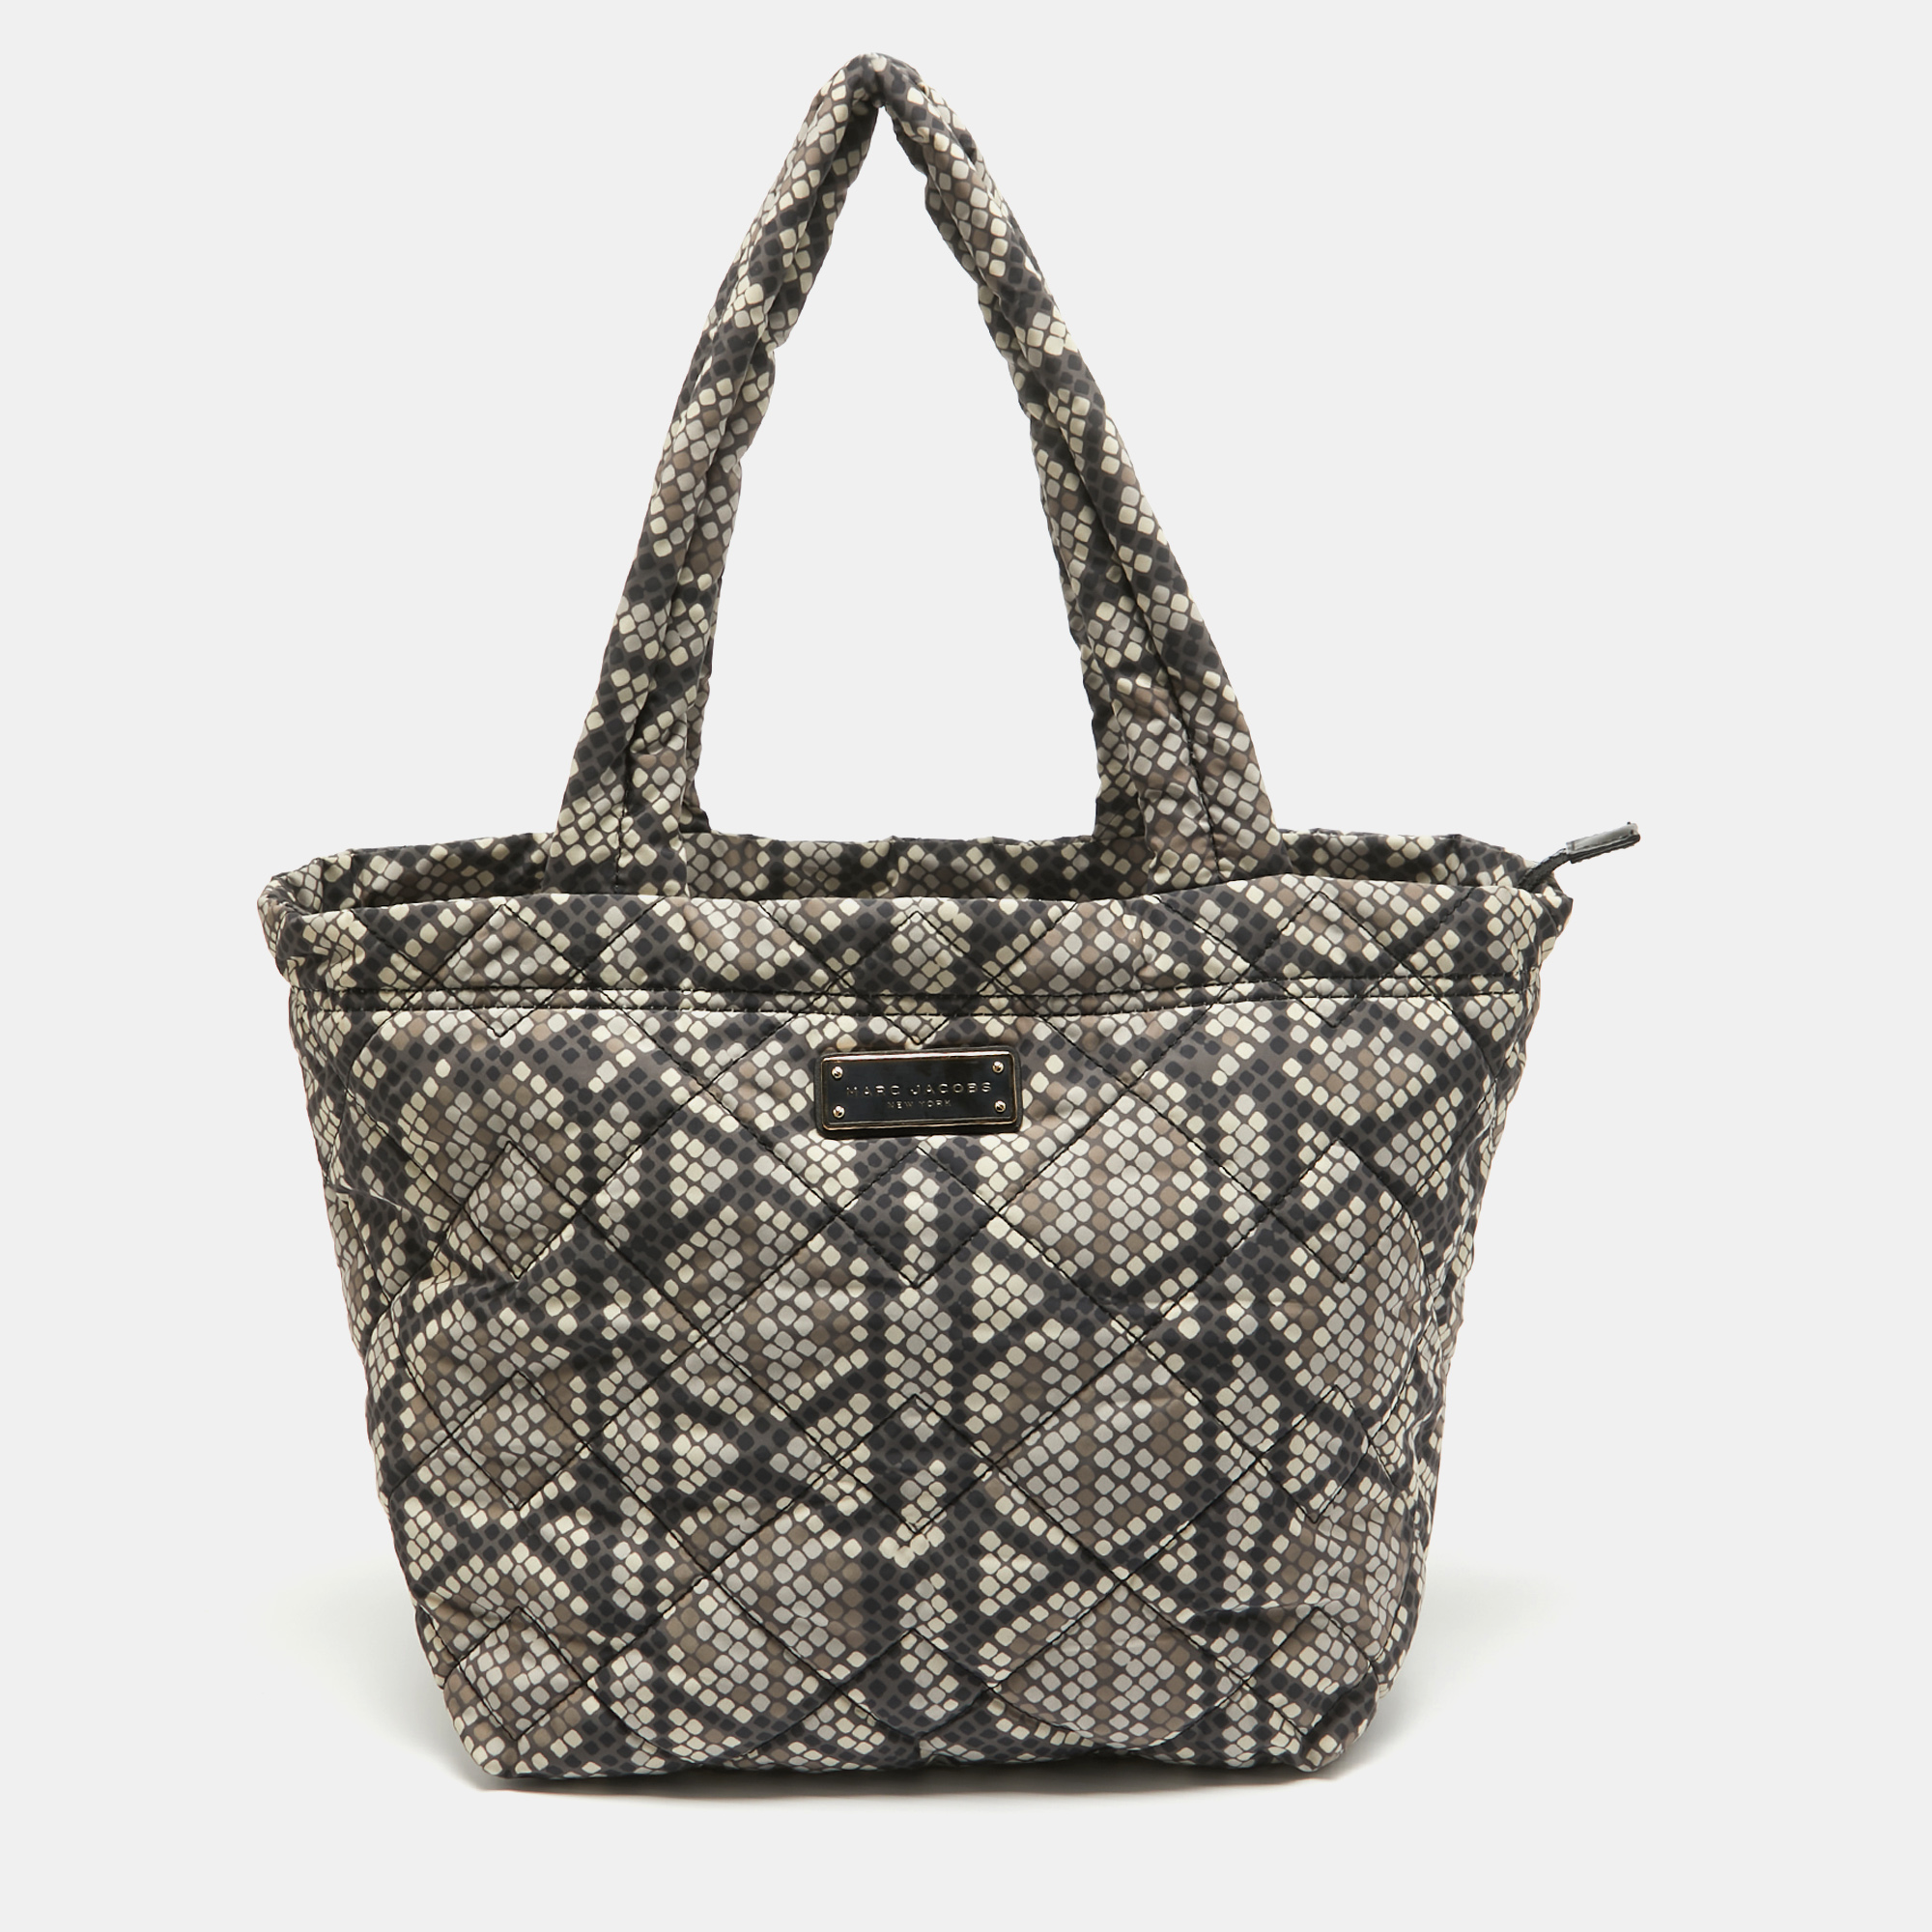 This alluring tote bag for women has been designed to assist you on any day. Convenient to carry and fashionably designed the tote is cut with skill and sewn into a great shape. It is well equipped to be a reliable accessory.